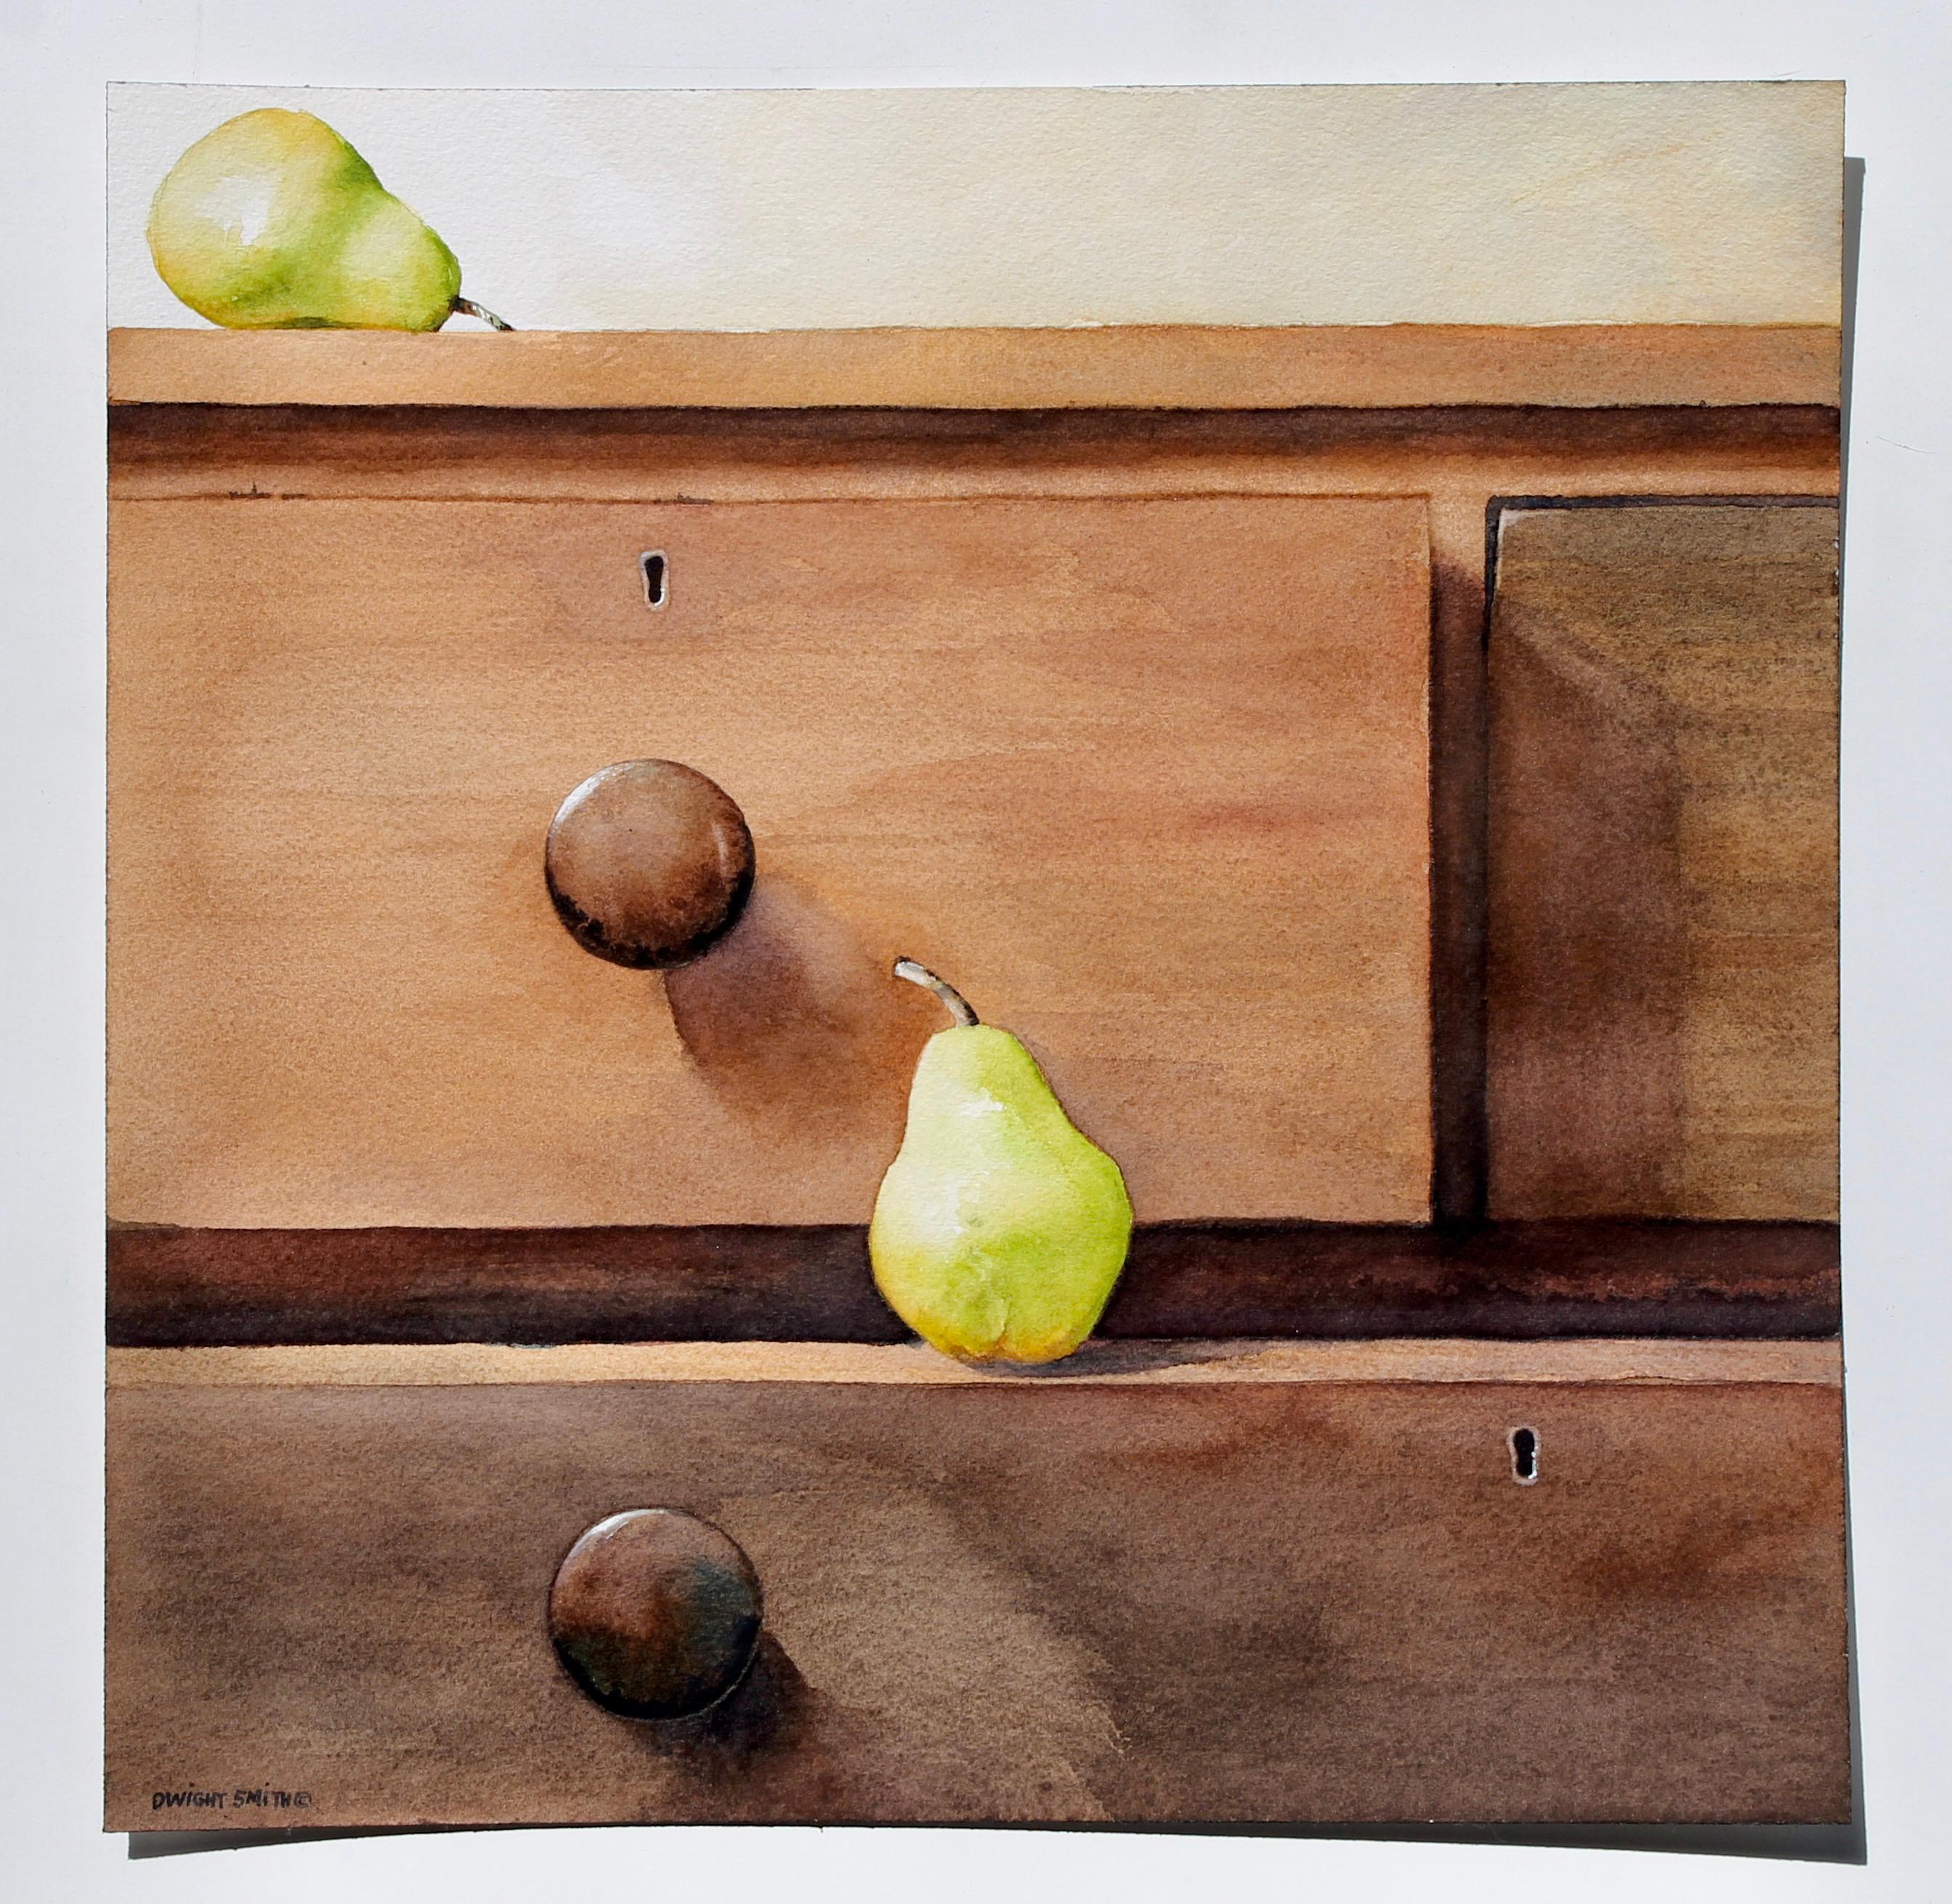 Antique Pears, Original Painting - American Realist Art by Dwight Smith